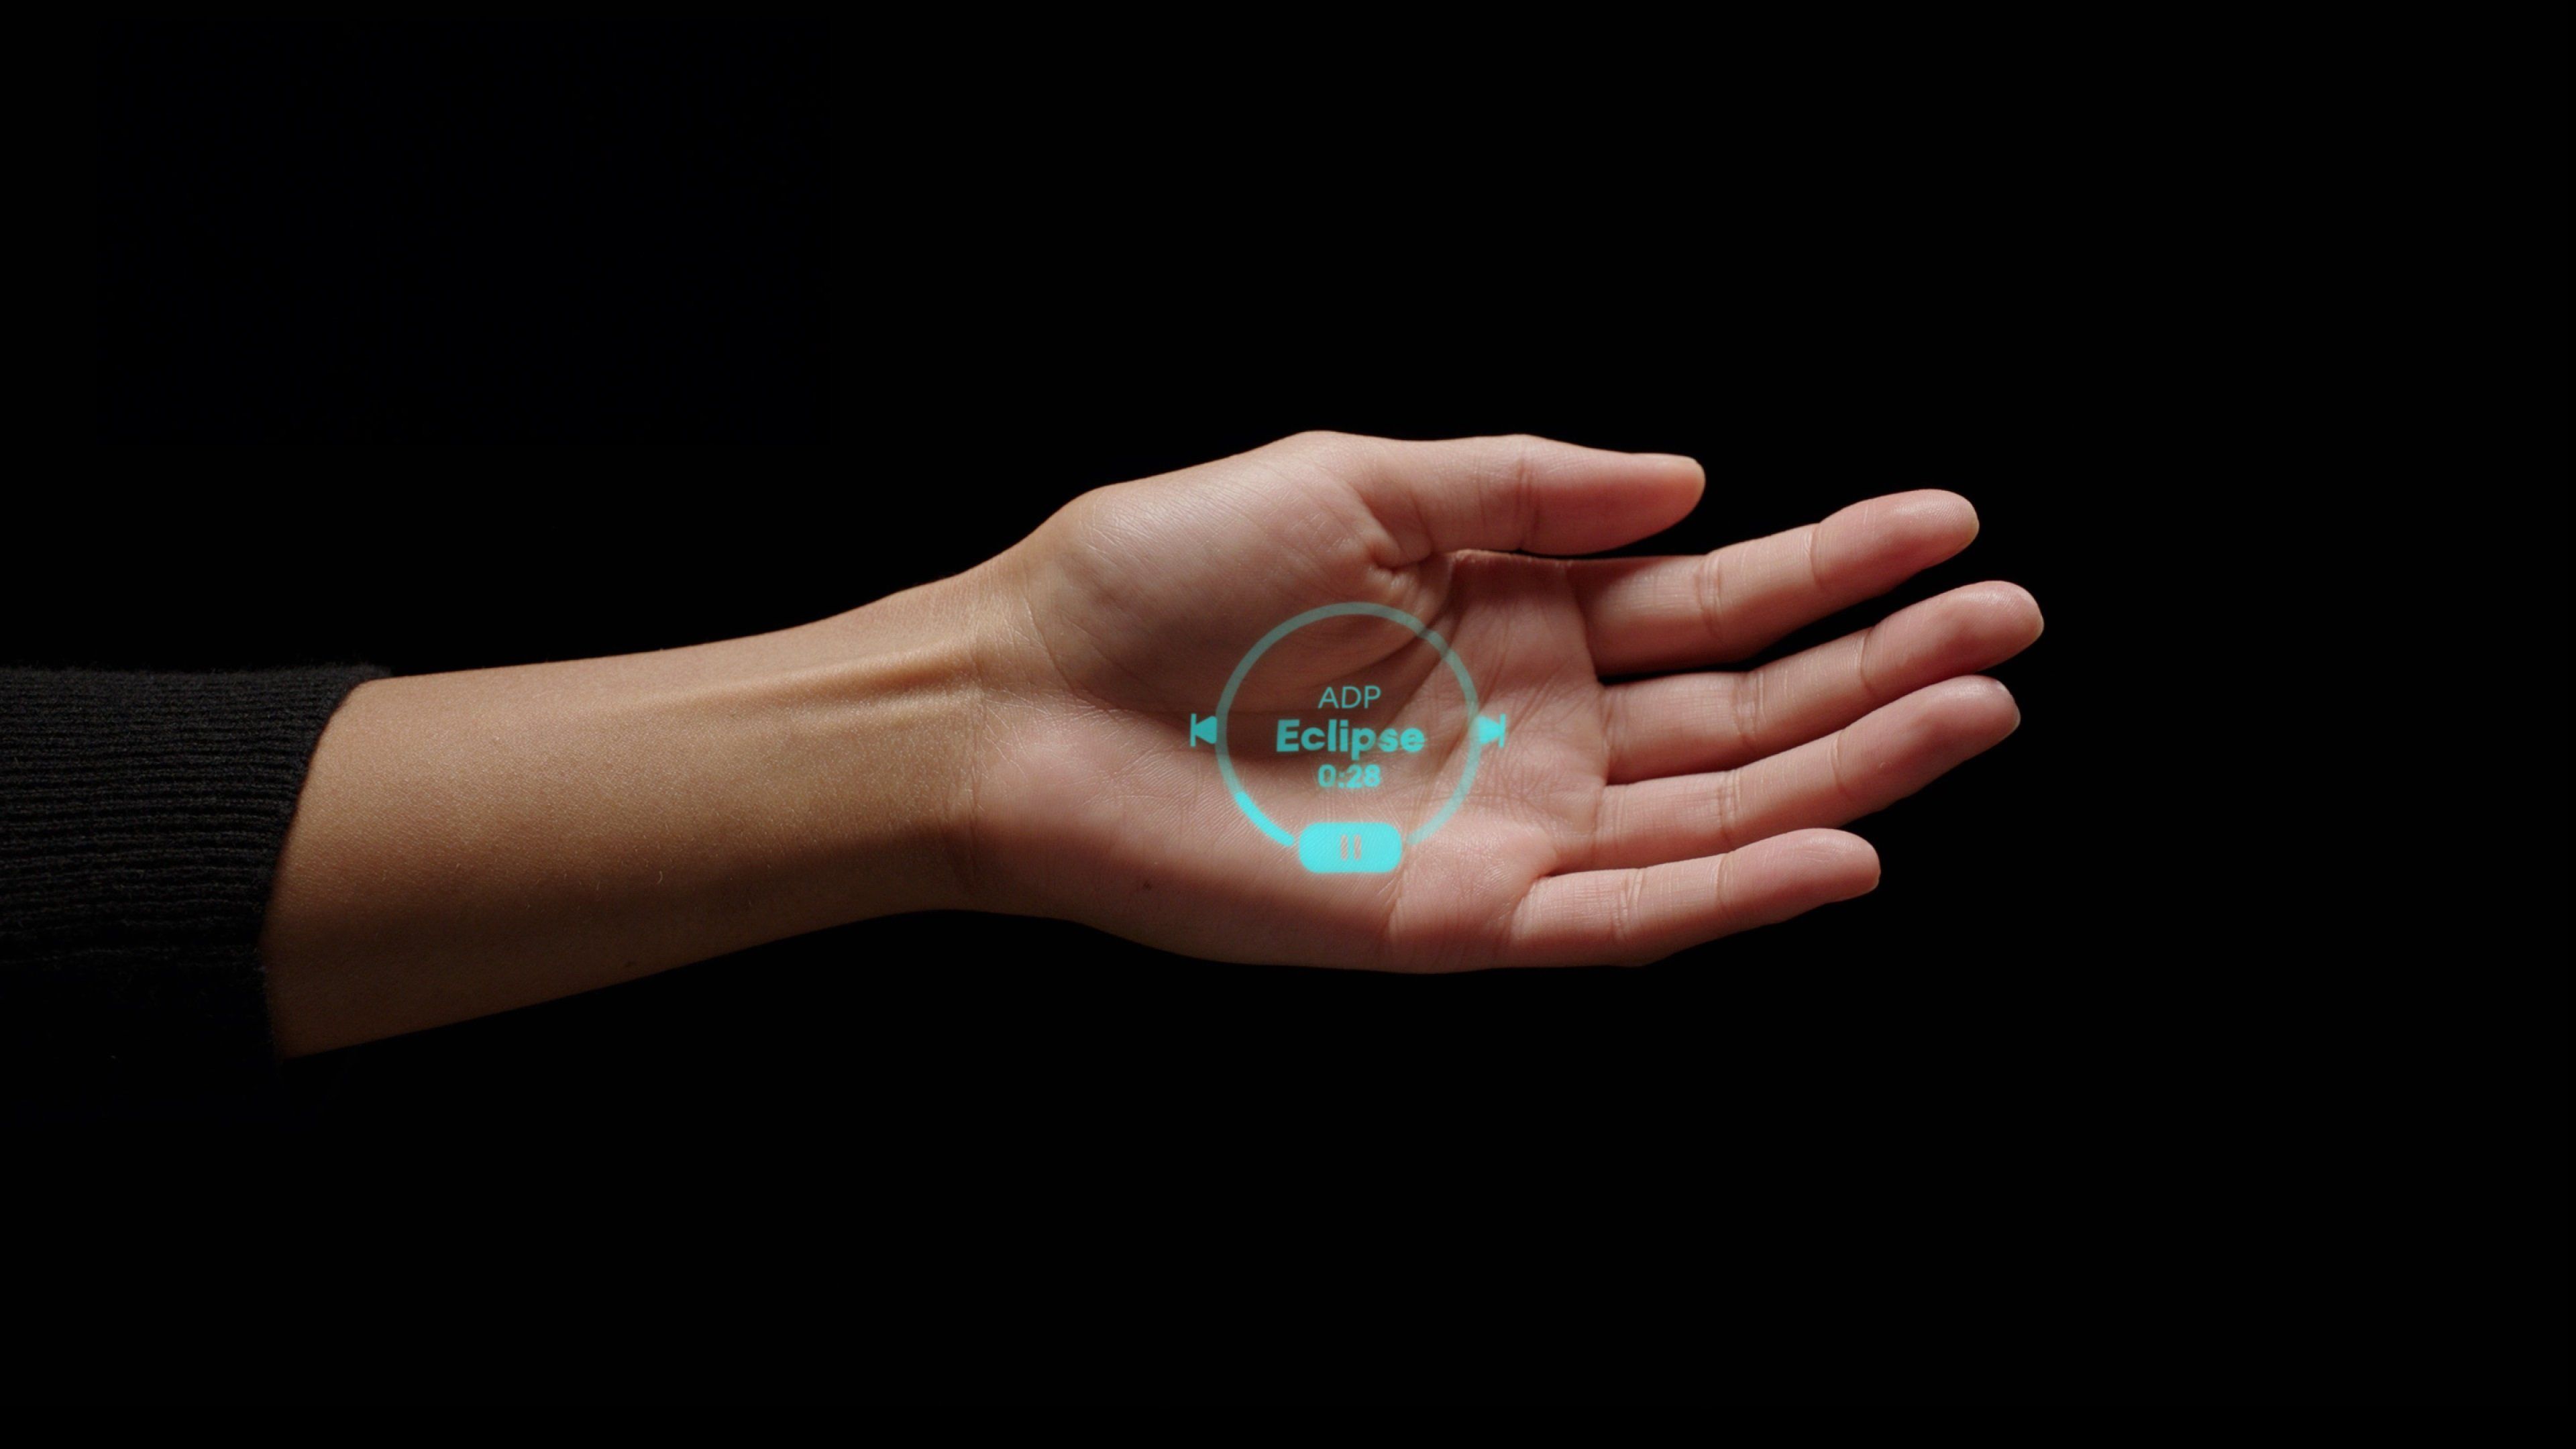 With the Ai Pin, your hand is the screen. A built-in projecter shows updates and controls, while hand gestures and voice commands can be used to navigate the rest.